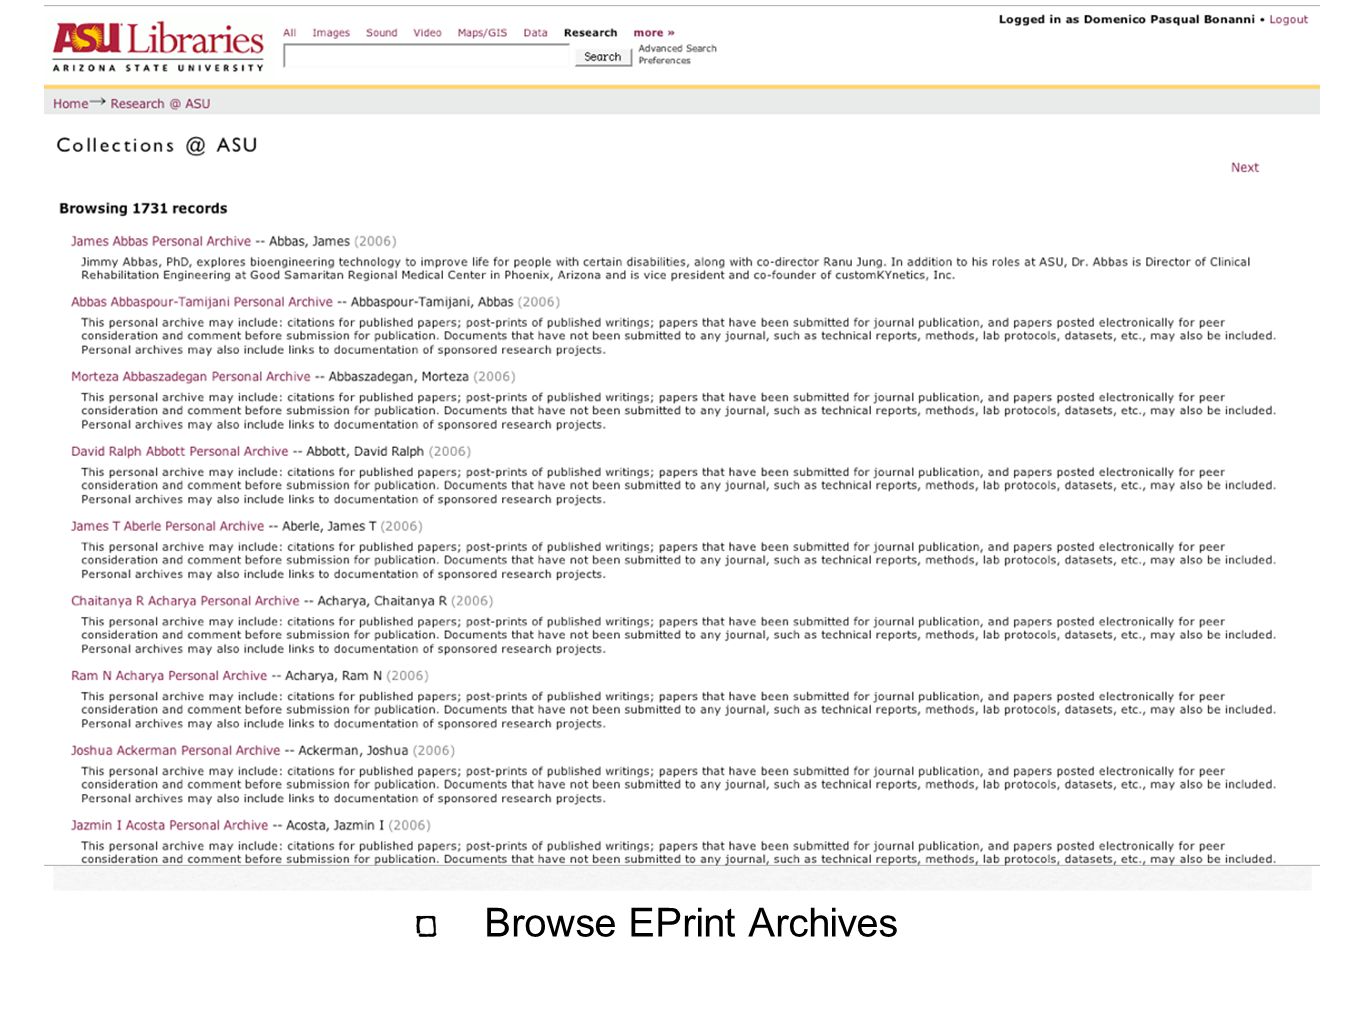 Browse EPrint Archives